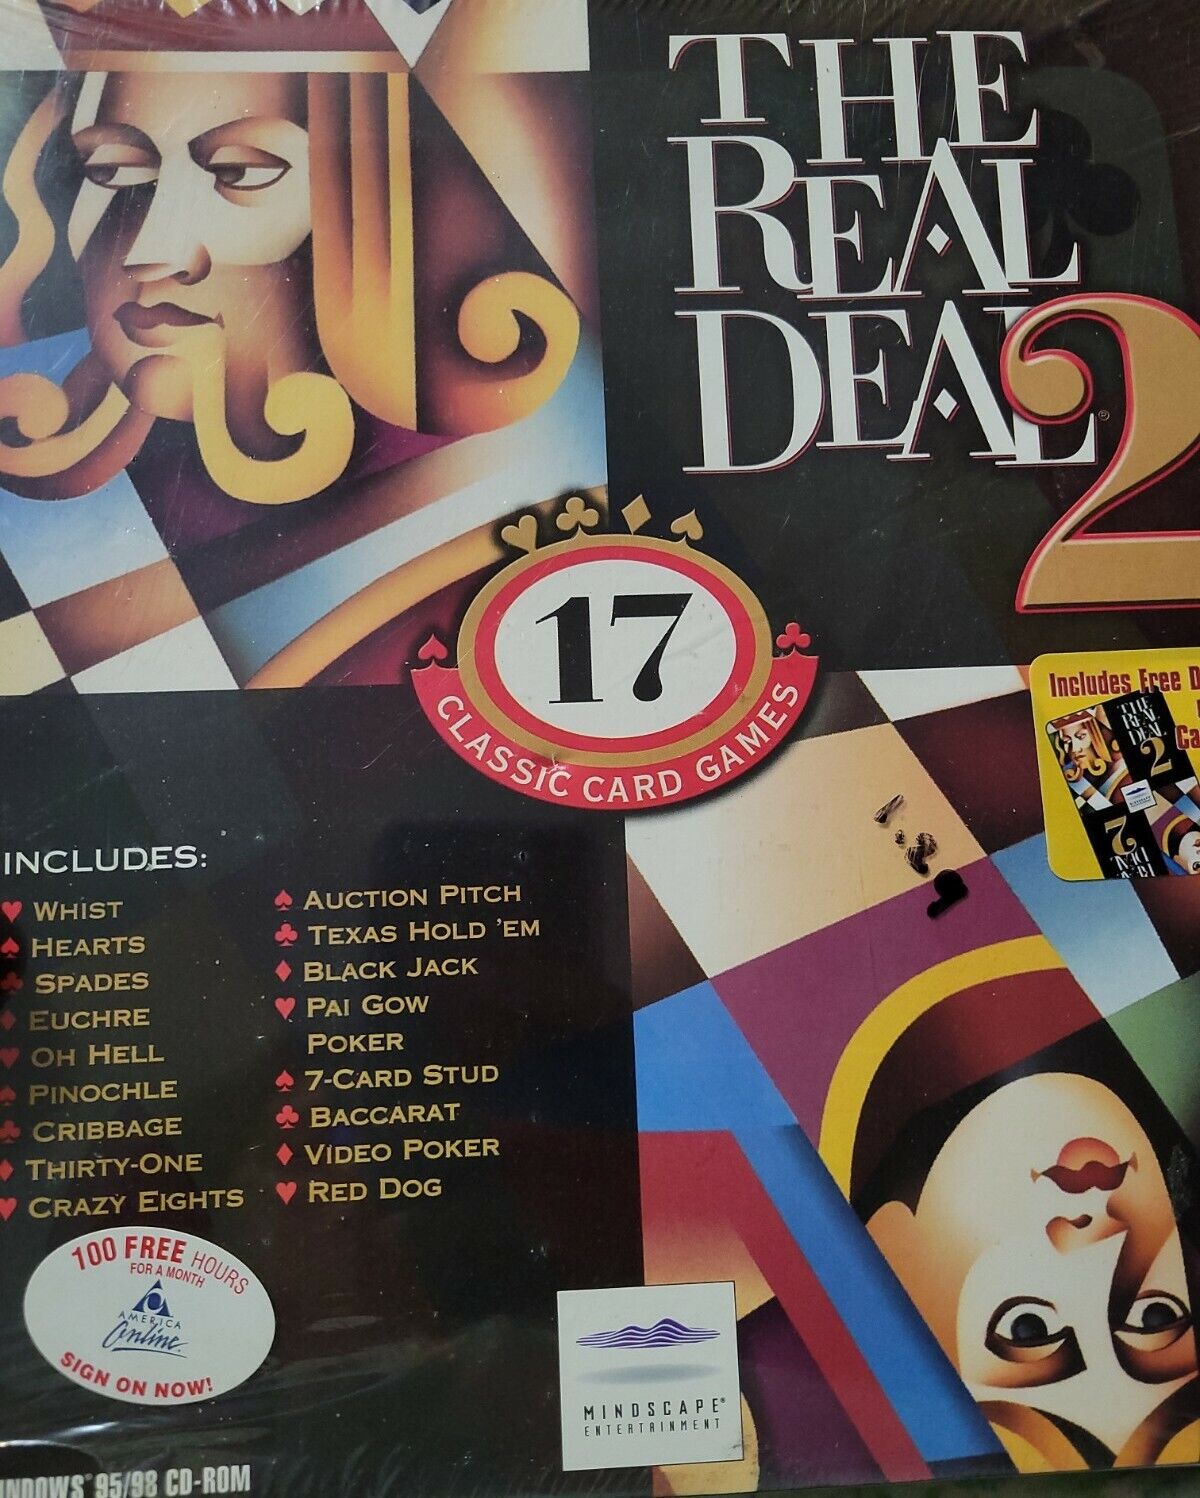 The Real Deal 2 Classic Card Games PC CD-ROM Mindscape TLC for Windows 95/98 new